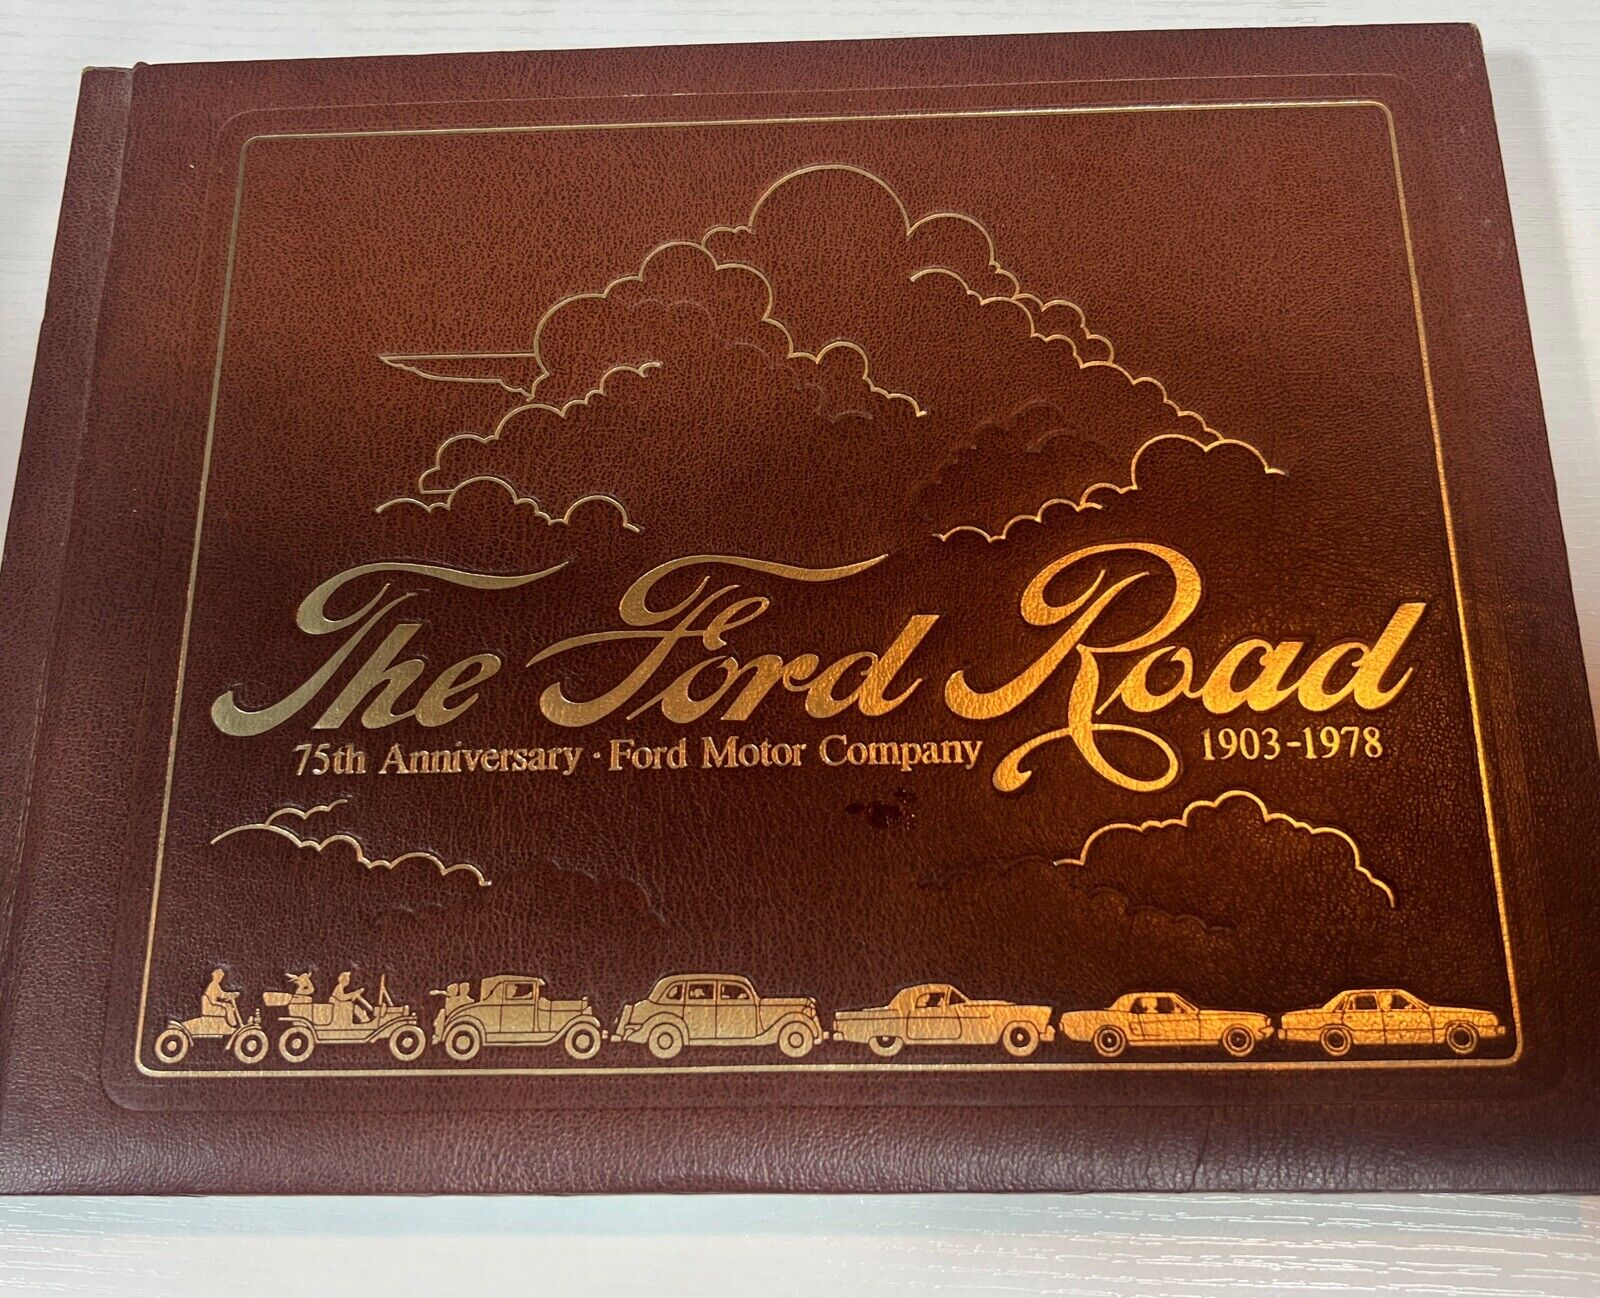 “The Ford Road” 75th Anniversary 1903-1978 Classic Car Ford Employee Annual Book